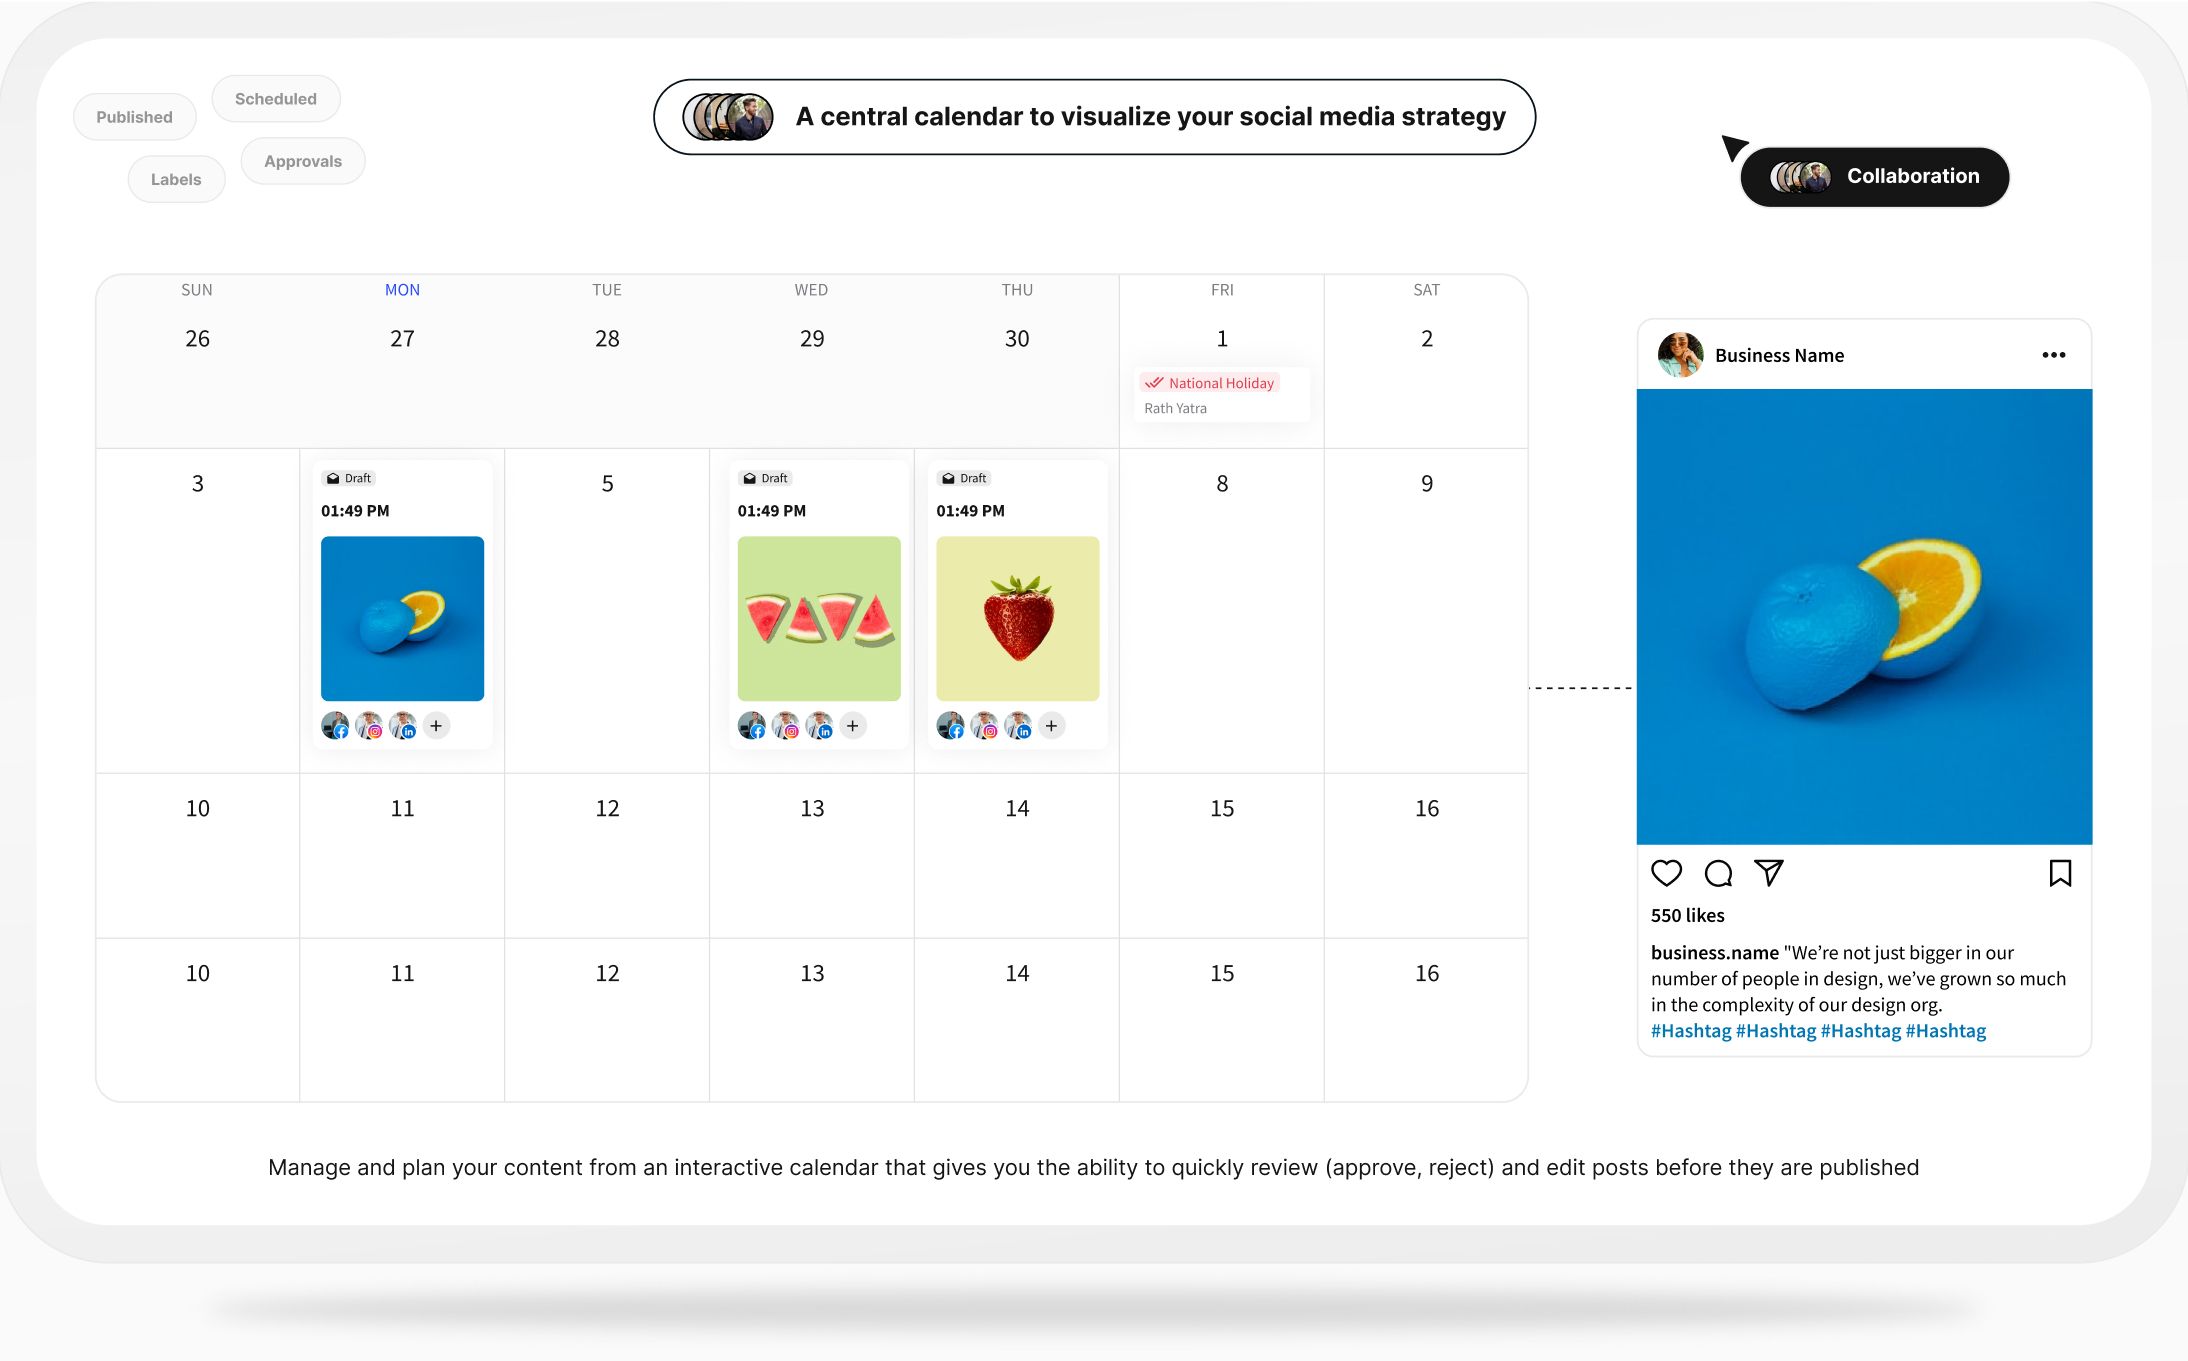 Social media content calendar interface with scheduled posts, including visual drafts and an option for collaborative review and management.